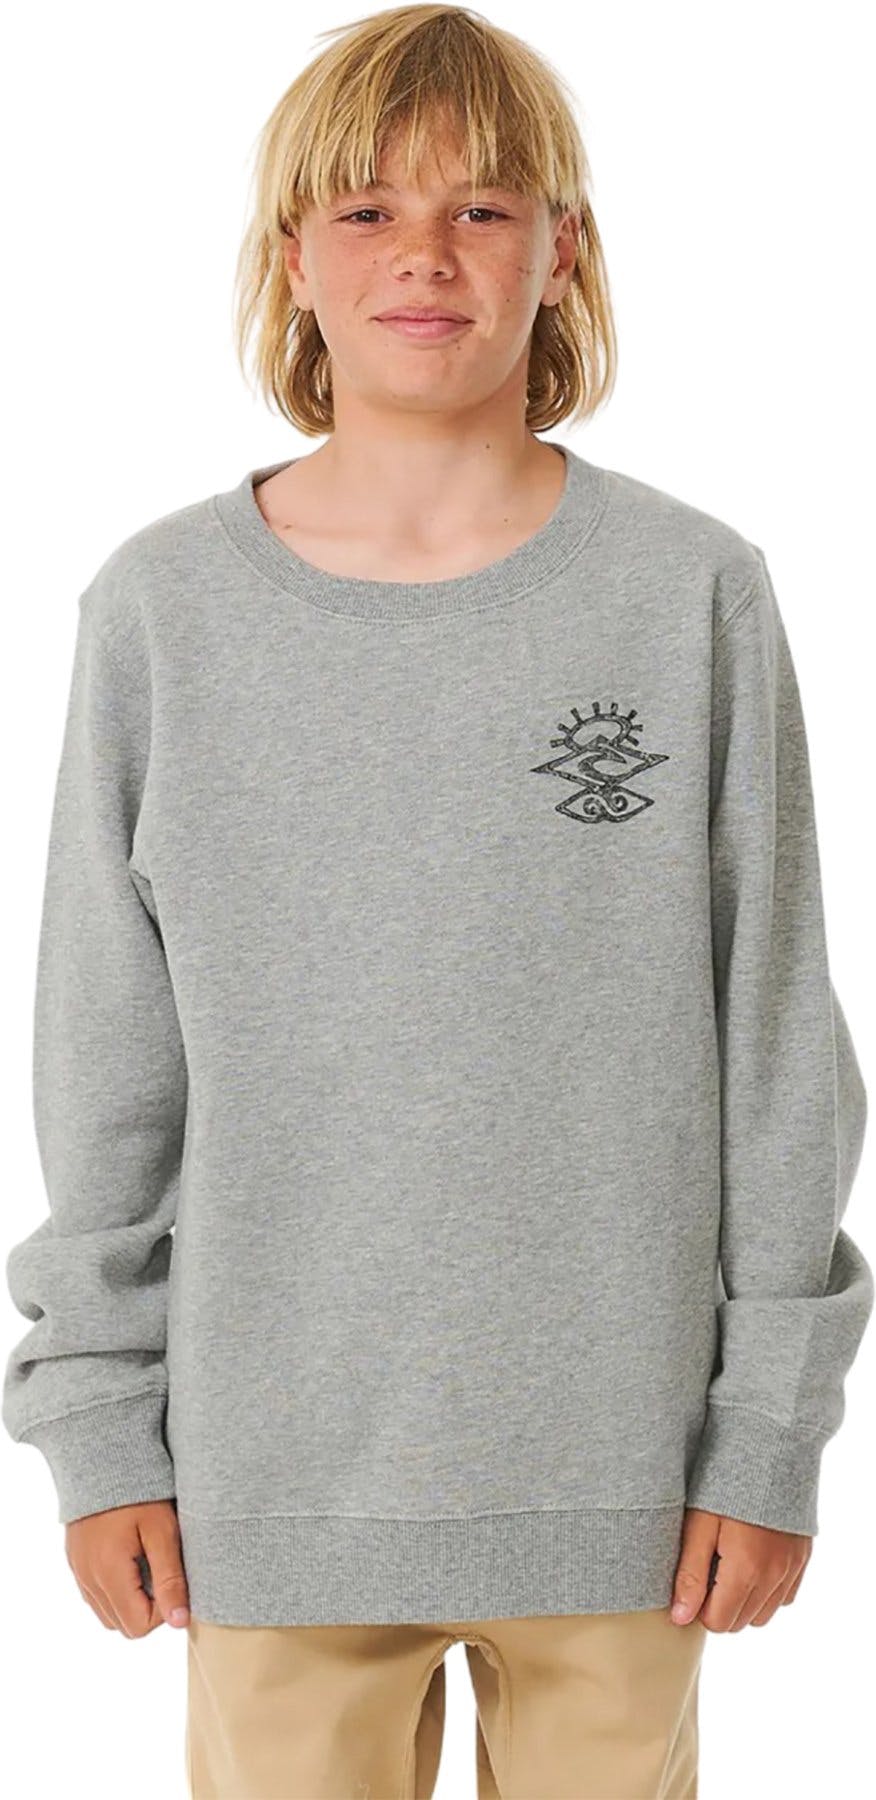 Product image for Shred Rock Crewneck Long Sleeve Sweater - Boys